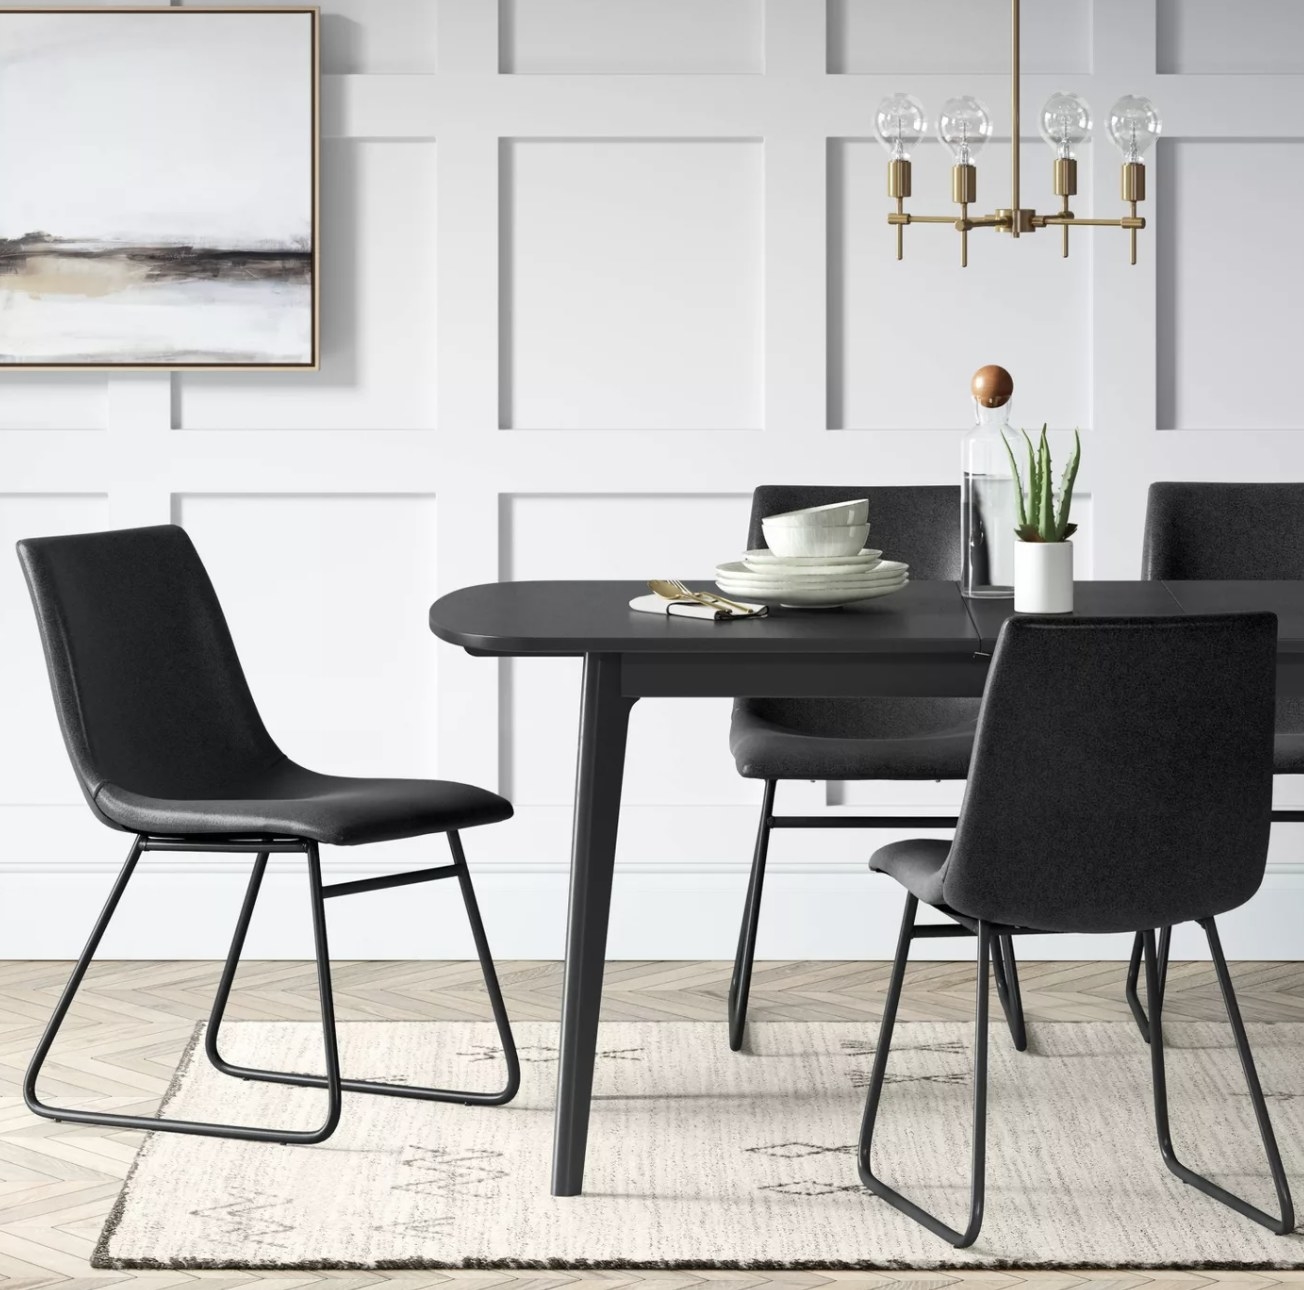 black leather upholstered chairs around a dining room table